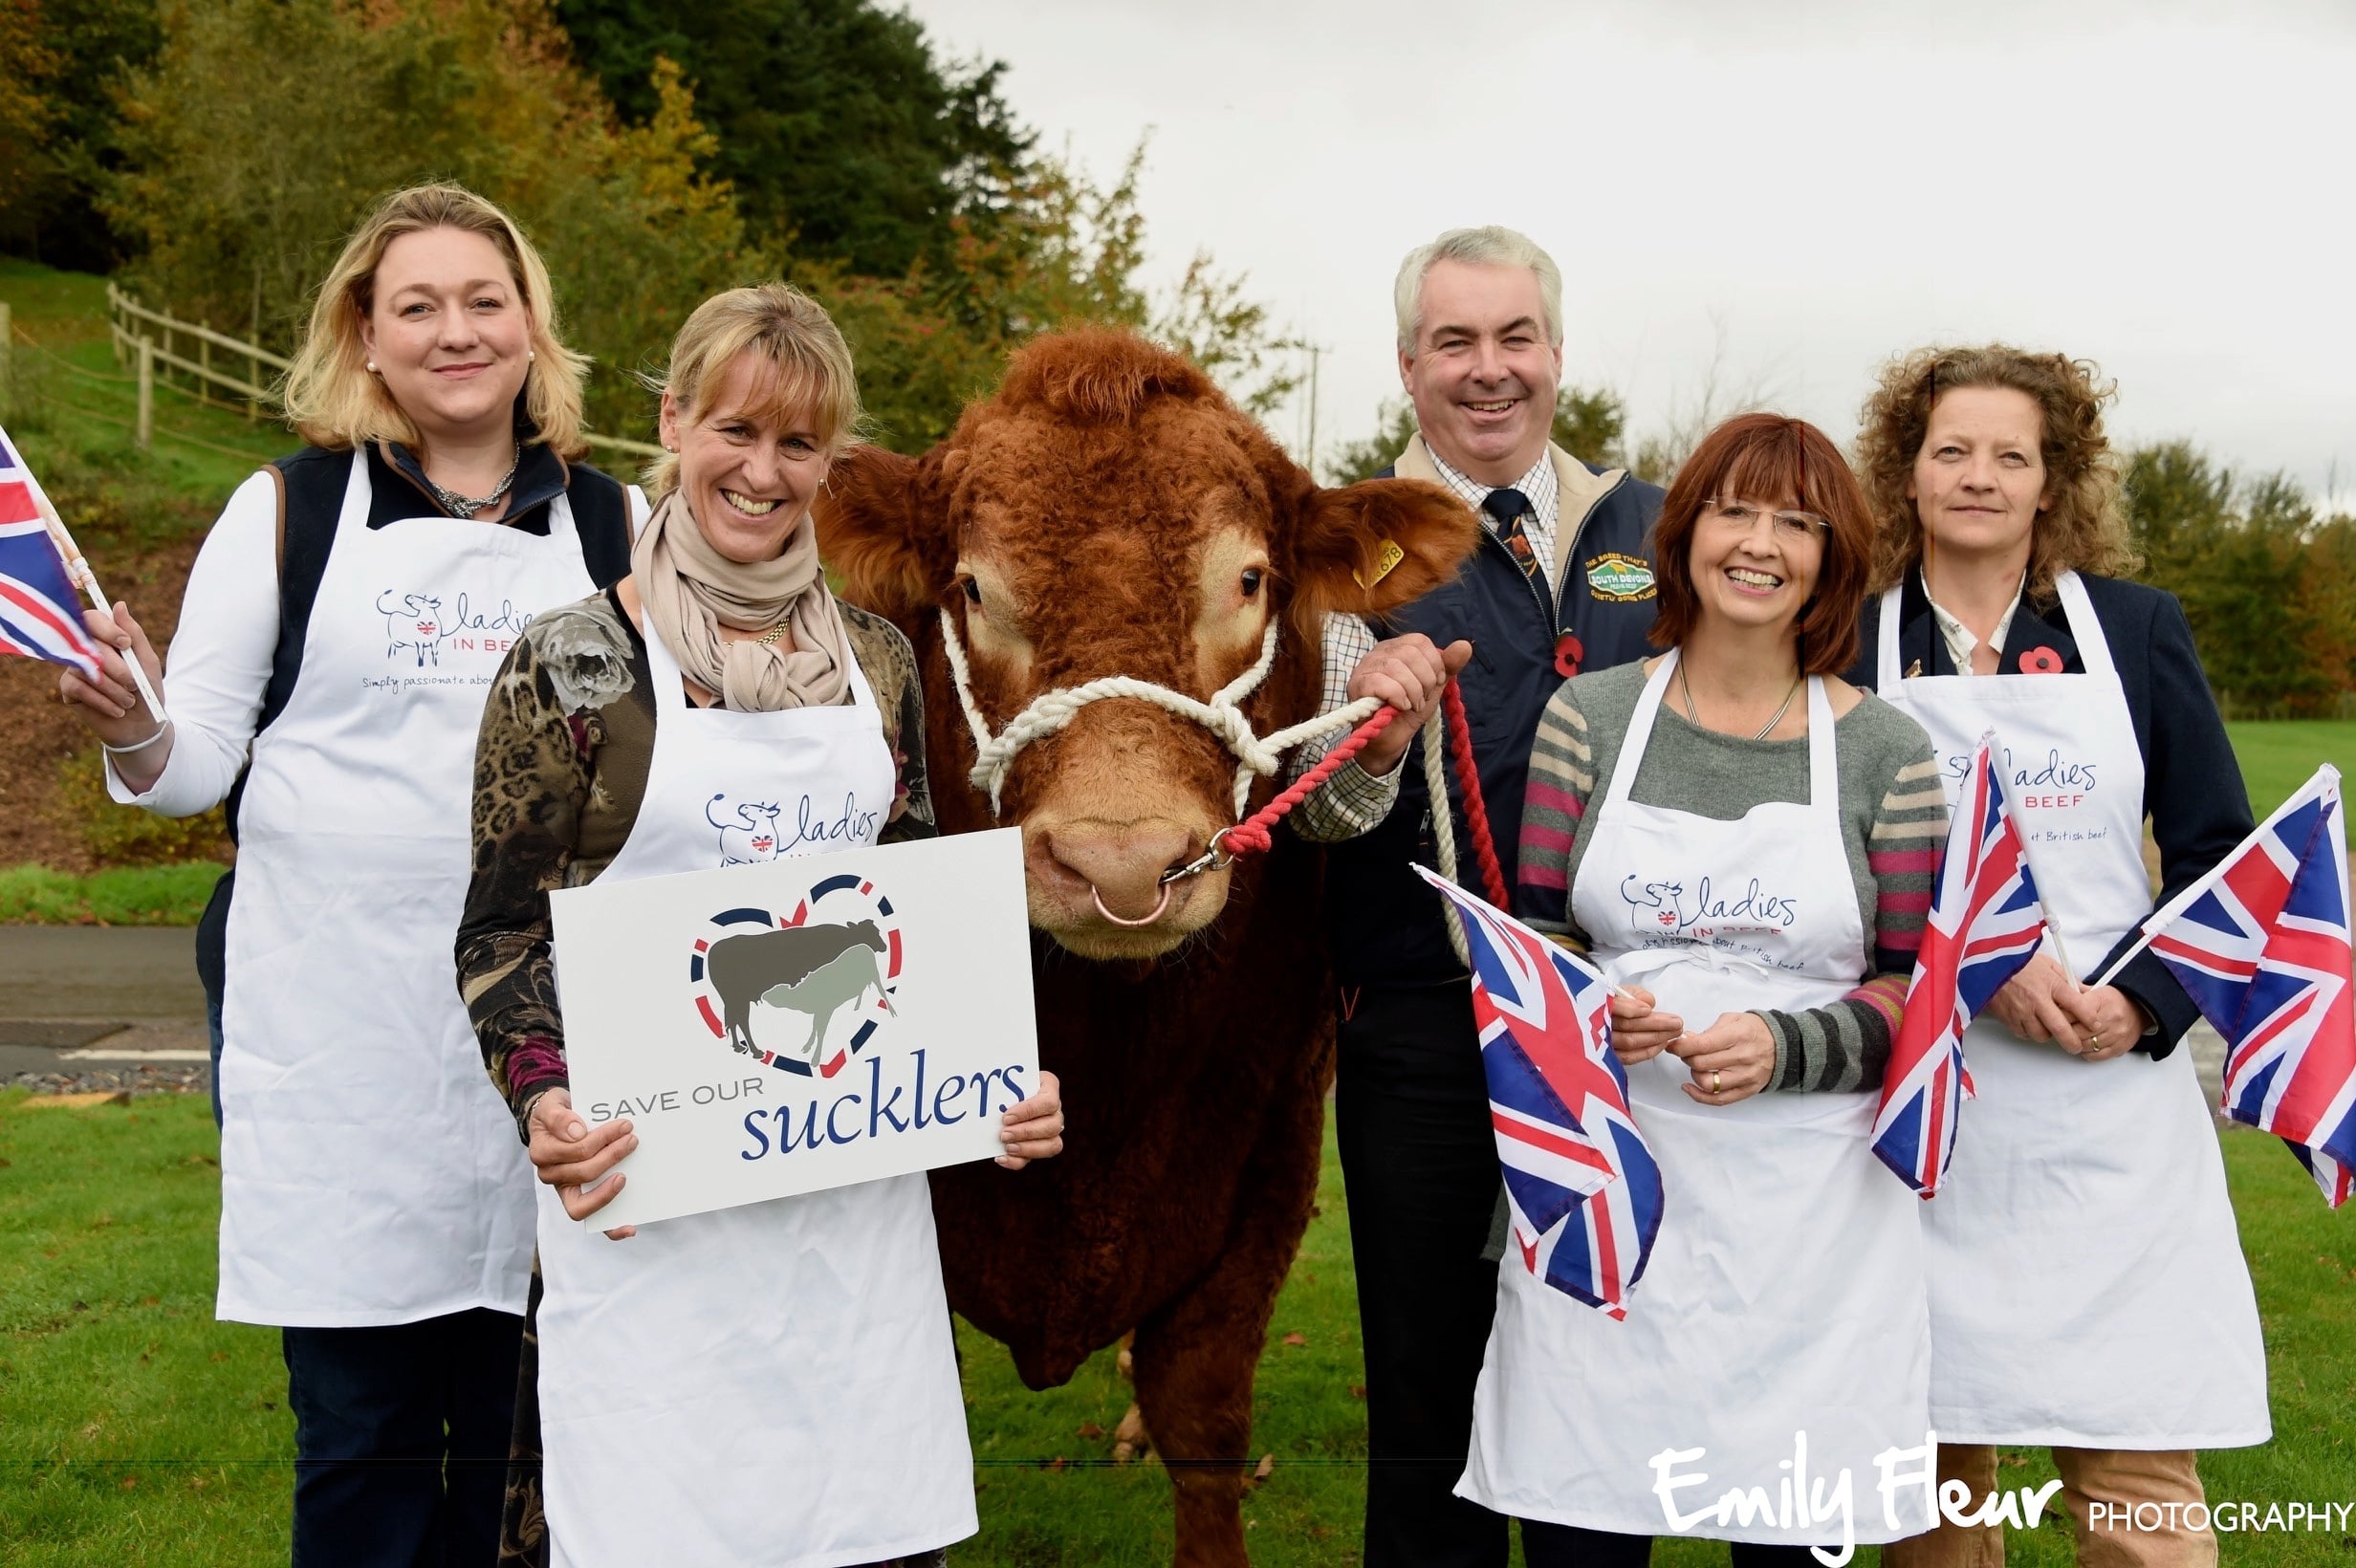 Left to right: Suzy Deeley, RABI, Minette Batters, LIB co-founder, David Thomas, South Devon breeder, Jilly Greed, LIB co-founder, Juliet Cleave, LIB member, Cornwall.